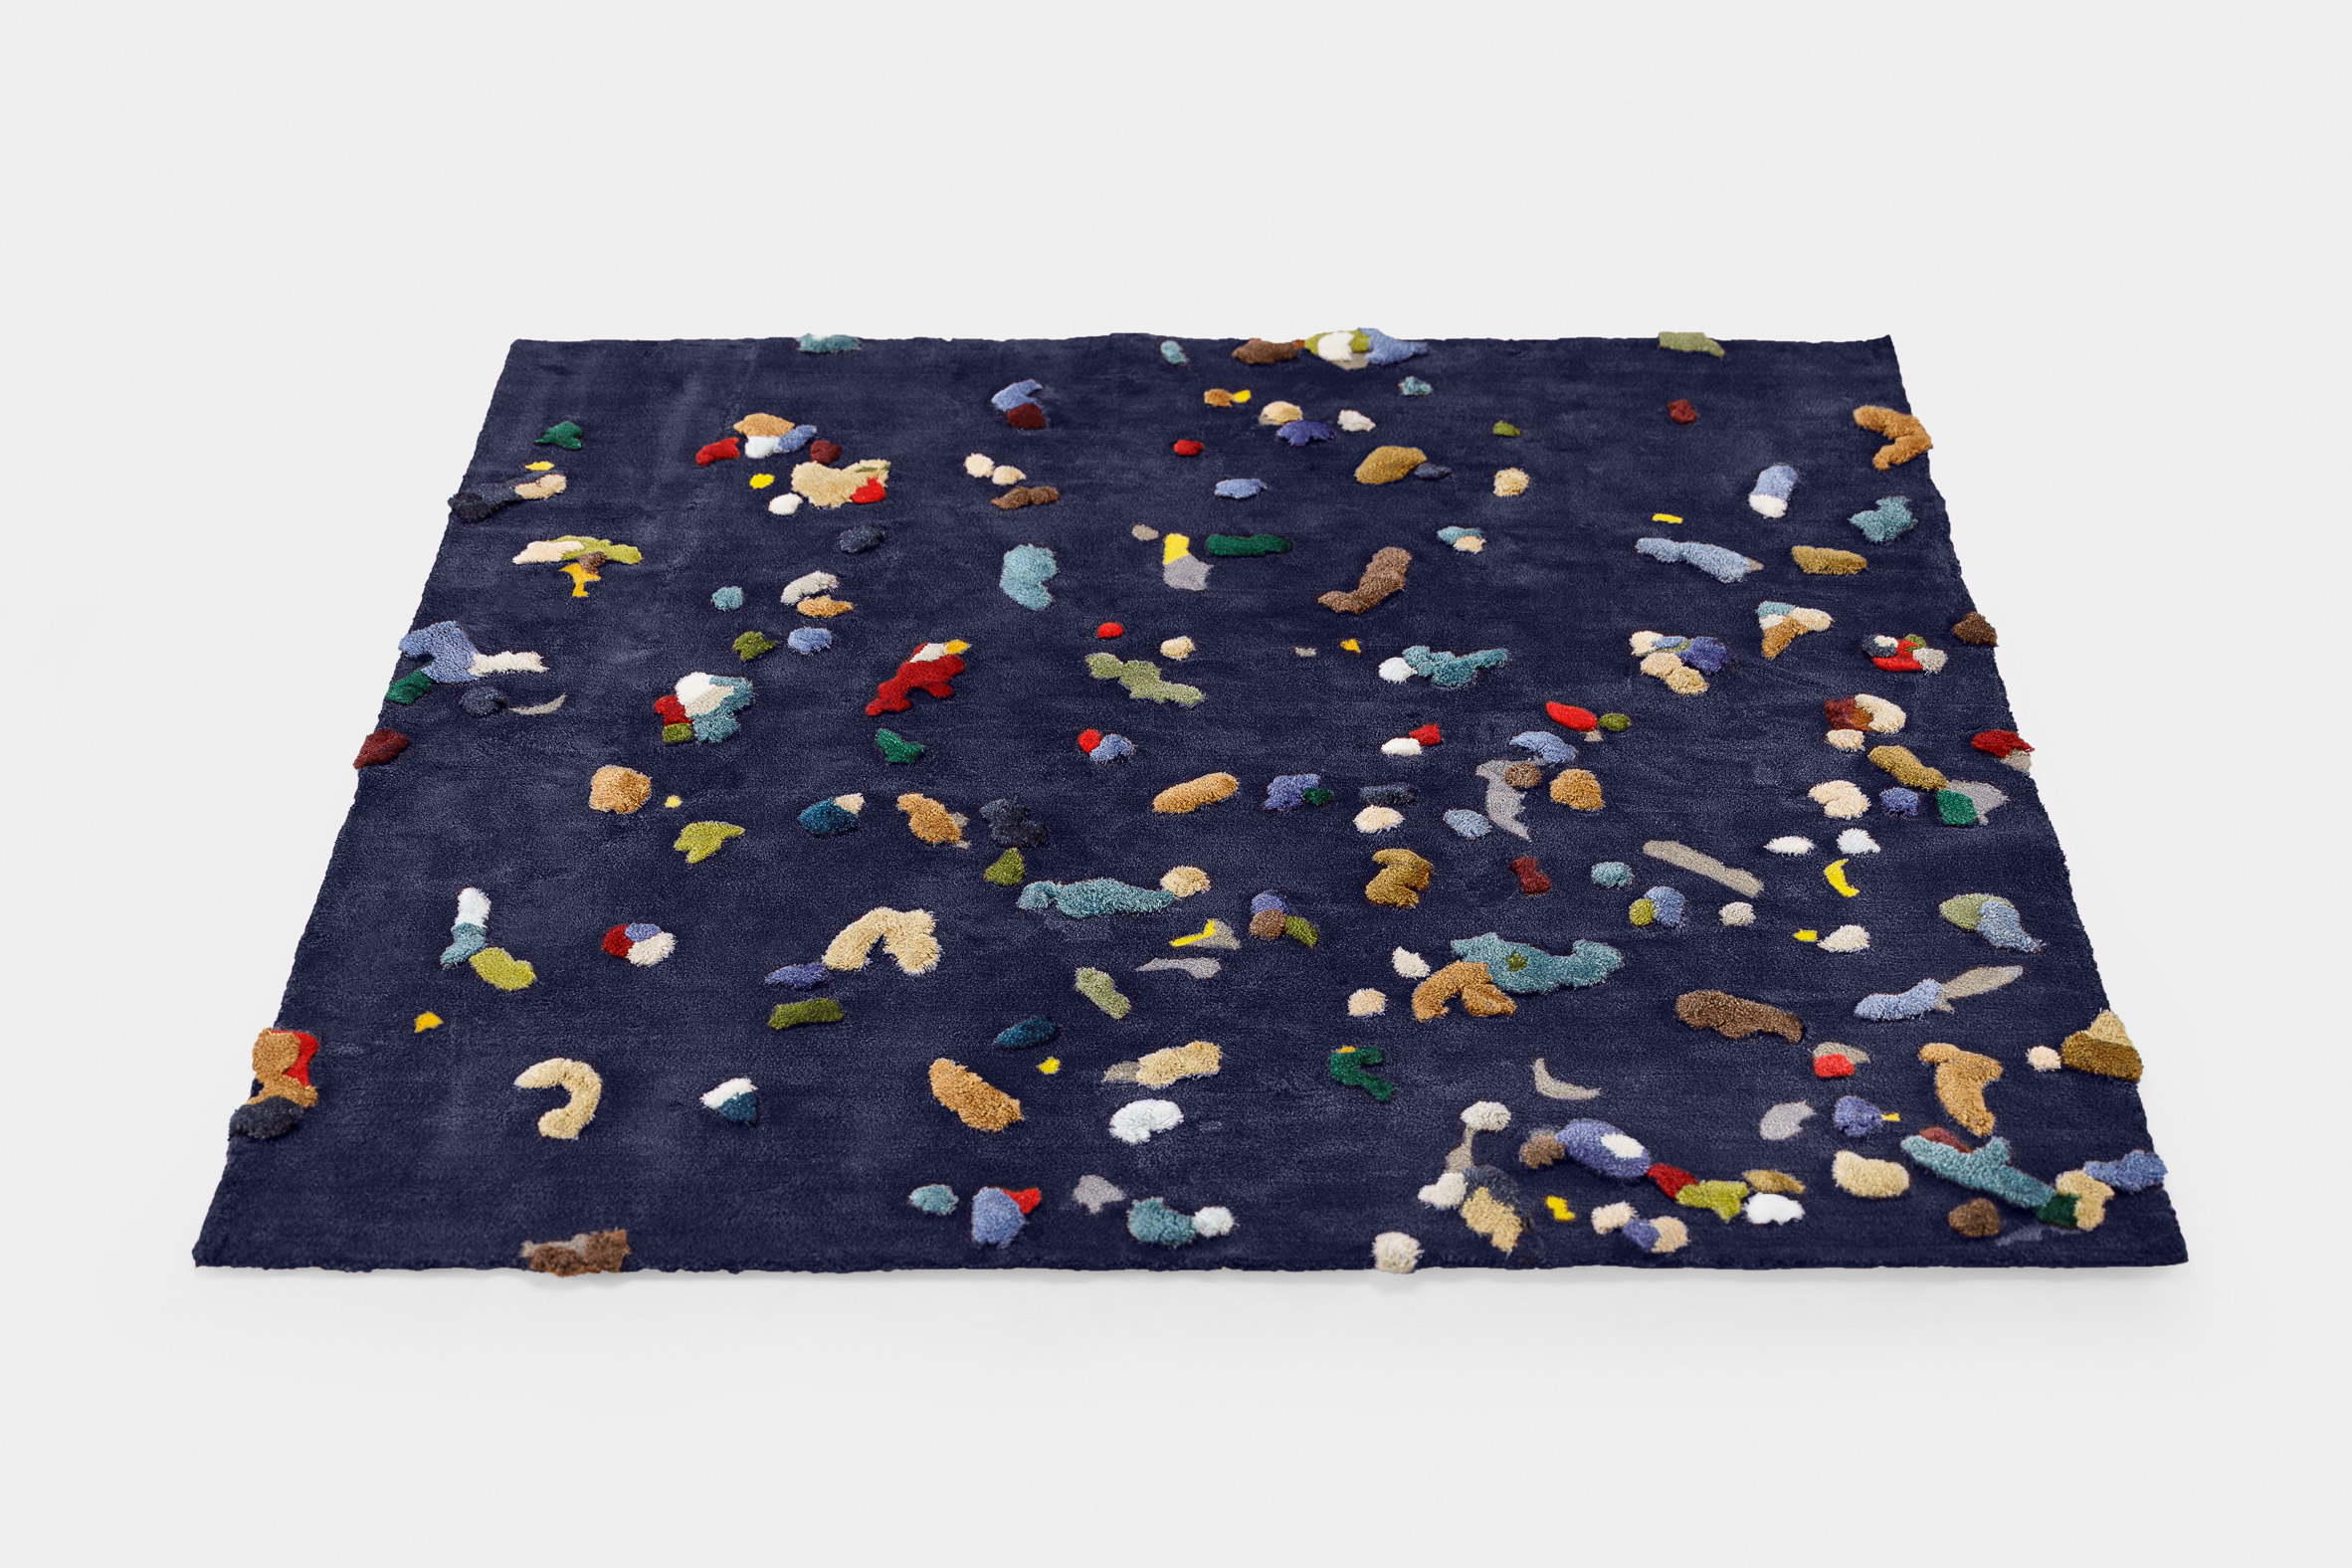 Blue Chaos rug by Audrone Drungilaite for Emko